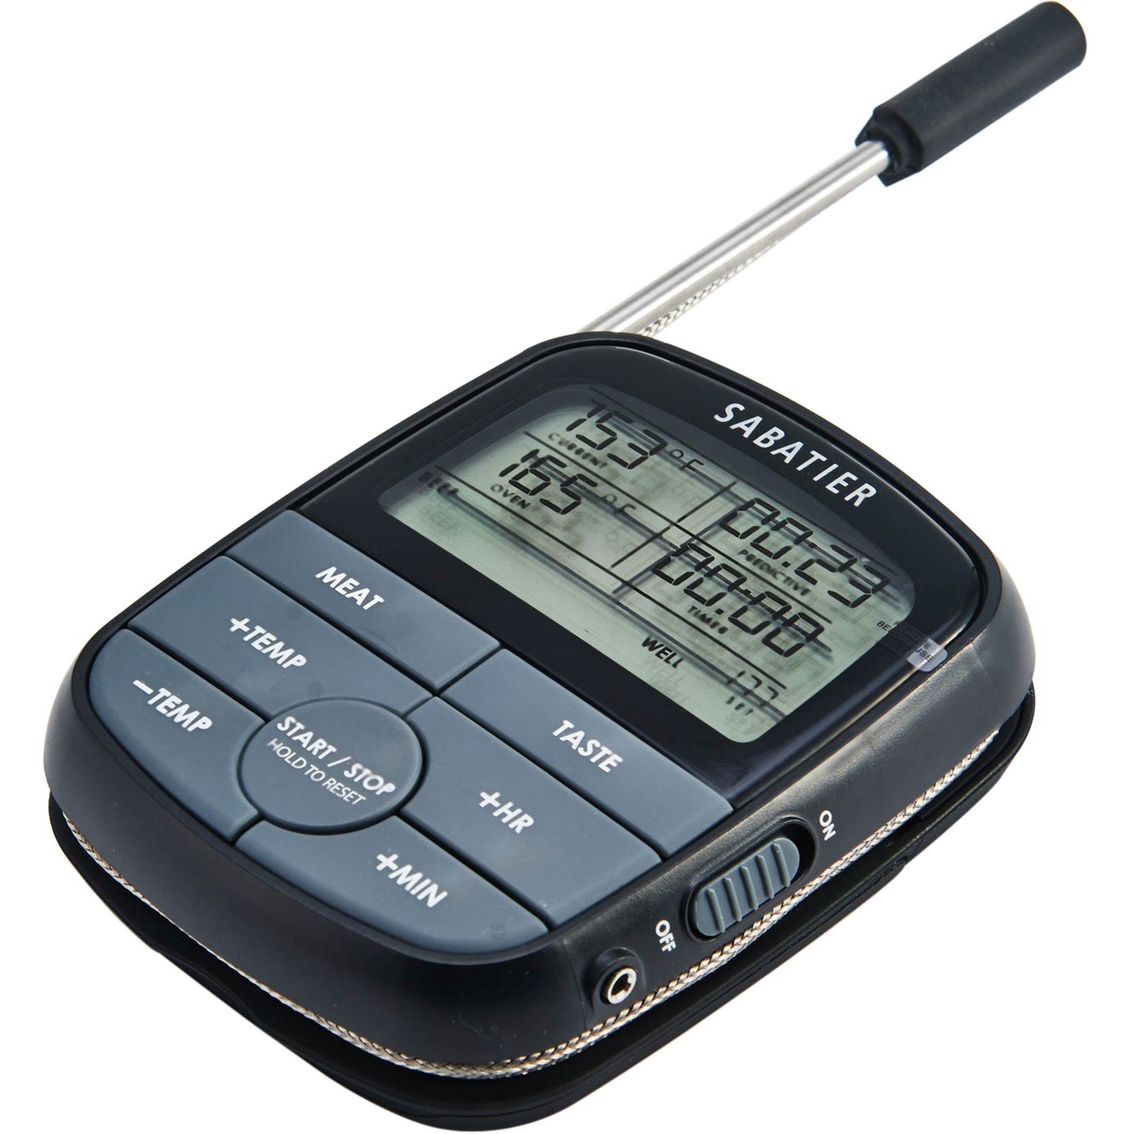 Sabatier Predictive Oven Probe Cooking Thermometer, Mixing & Measuring, Household